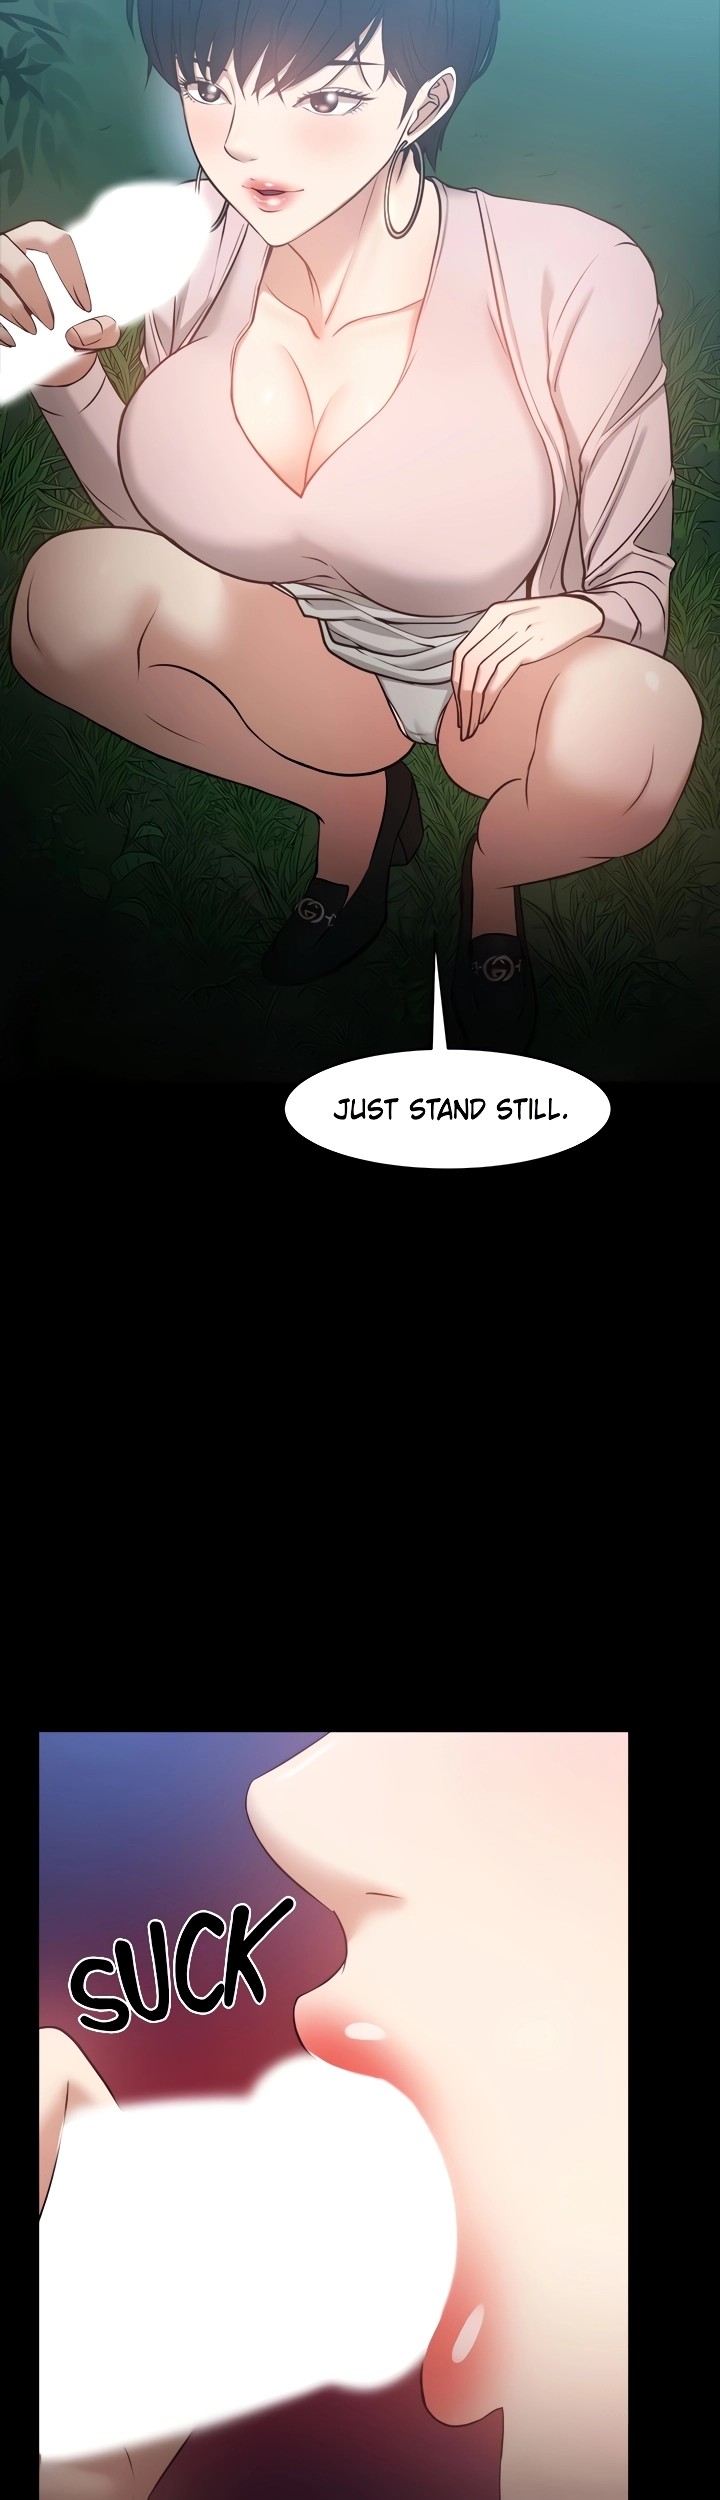 Are You Just Going To Watch? - Chapter 28 Page 28